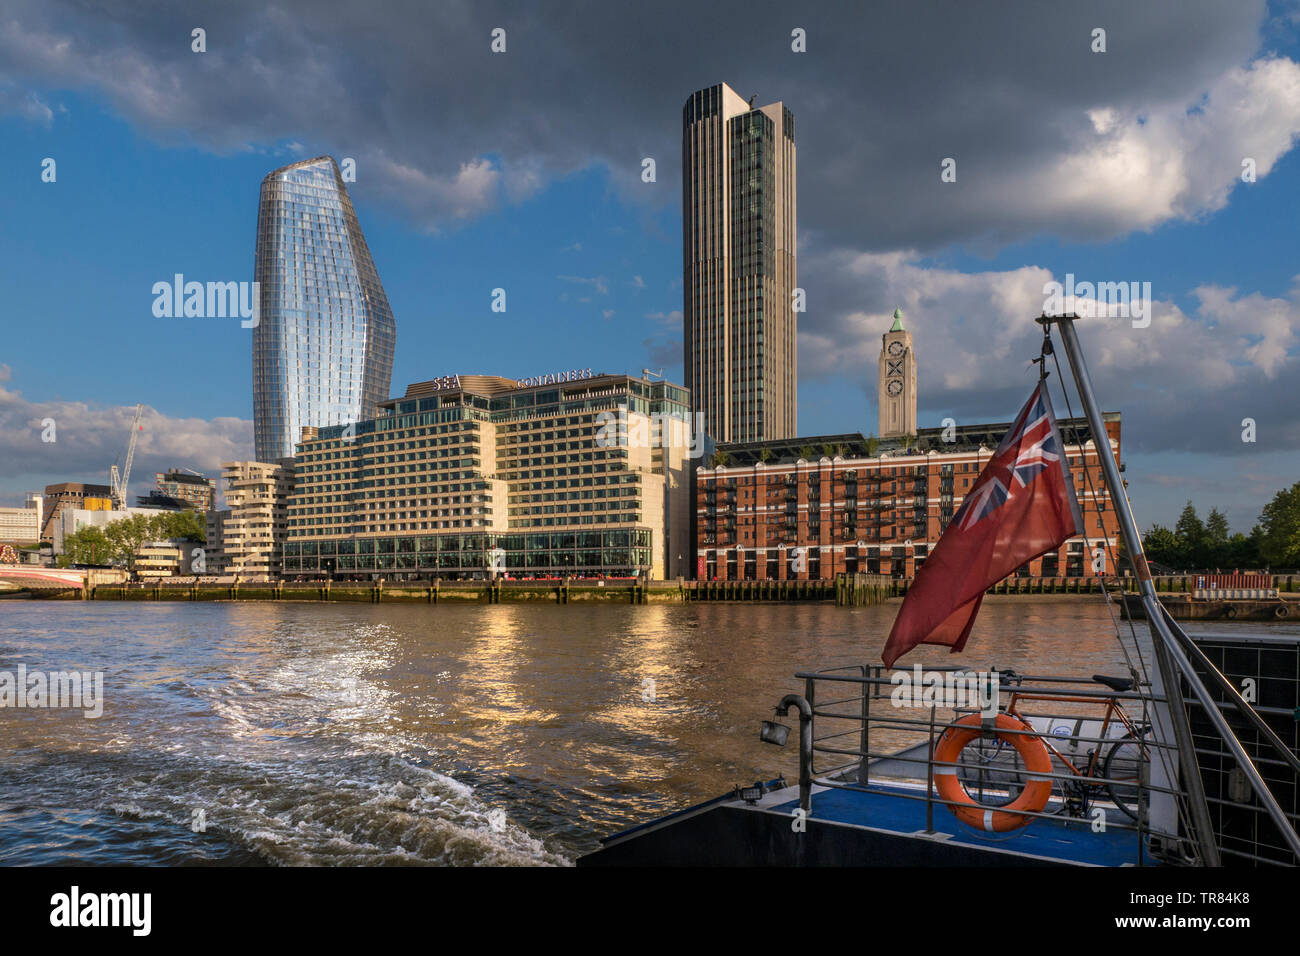 Sea Containers Hotel Complex, Bank Towers, Cityscape River Thames, Oxo Tower & Wharf, One Blackfriars 'The Vase'  from RB1 Boat SouthBank London UK Stock Photo